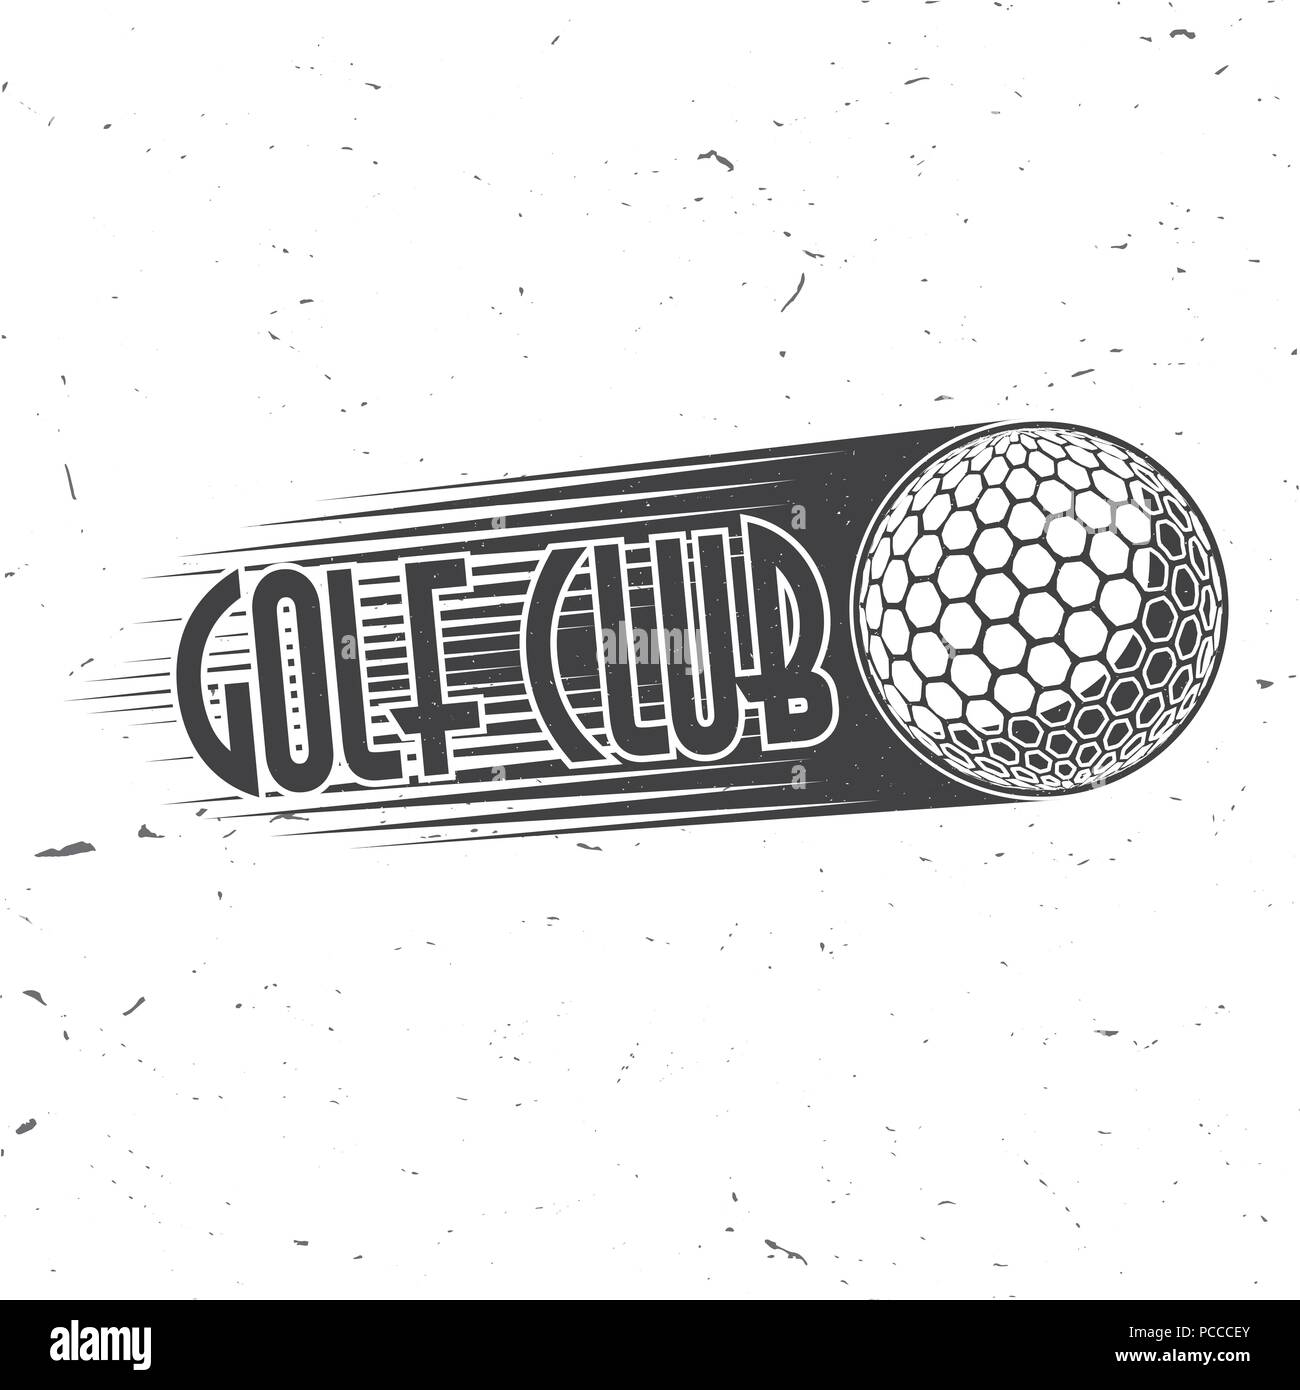 Golf club. Vector illustration. Concept for shirt, print, seal or stamp. Typography design Stock Vector